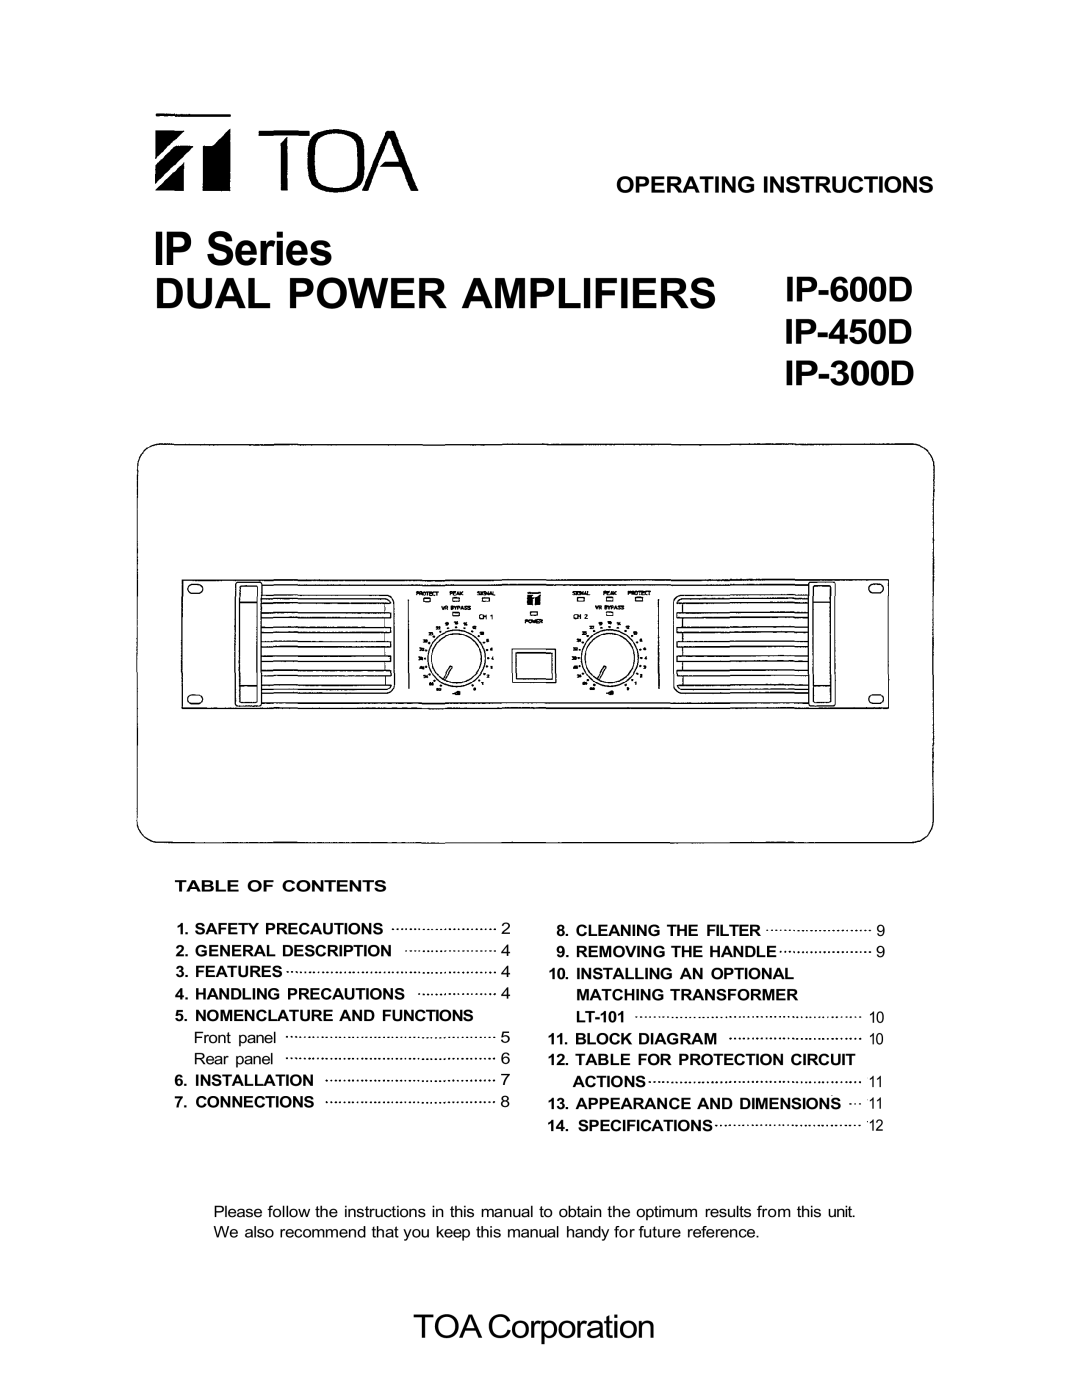 TOA Electronics dimensions Operating Instructions, IP Series, DUAL POWER AMPLIFIERS IP-600D, IP-450D IP-300D 